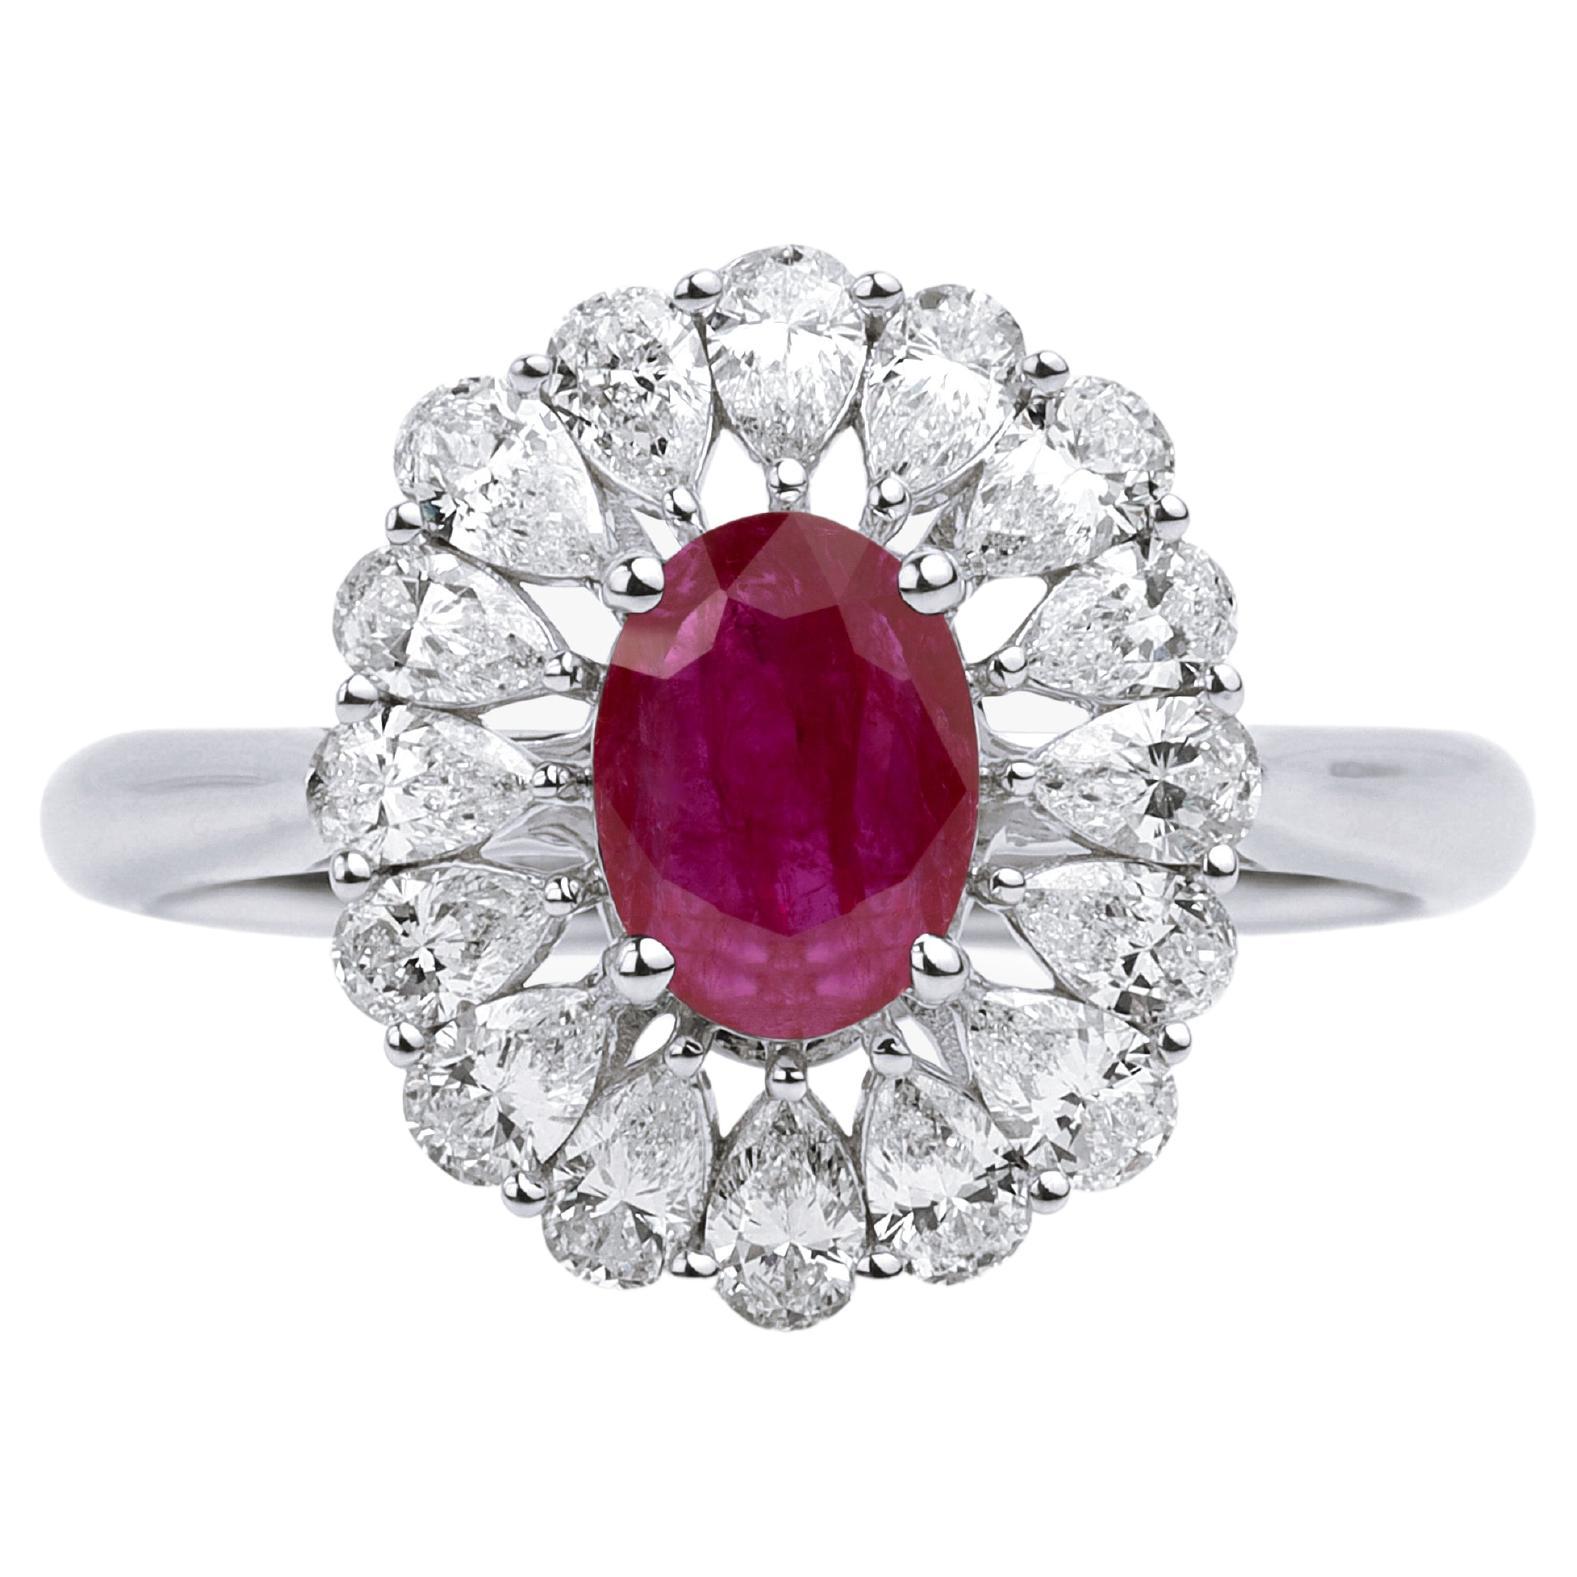 Oval Red Ruby Diamond Pear Cut Halo Cocktail Engagement Ring in White Gold